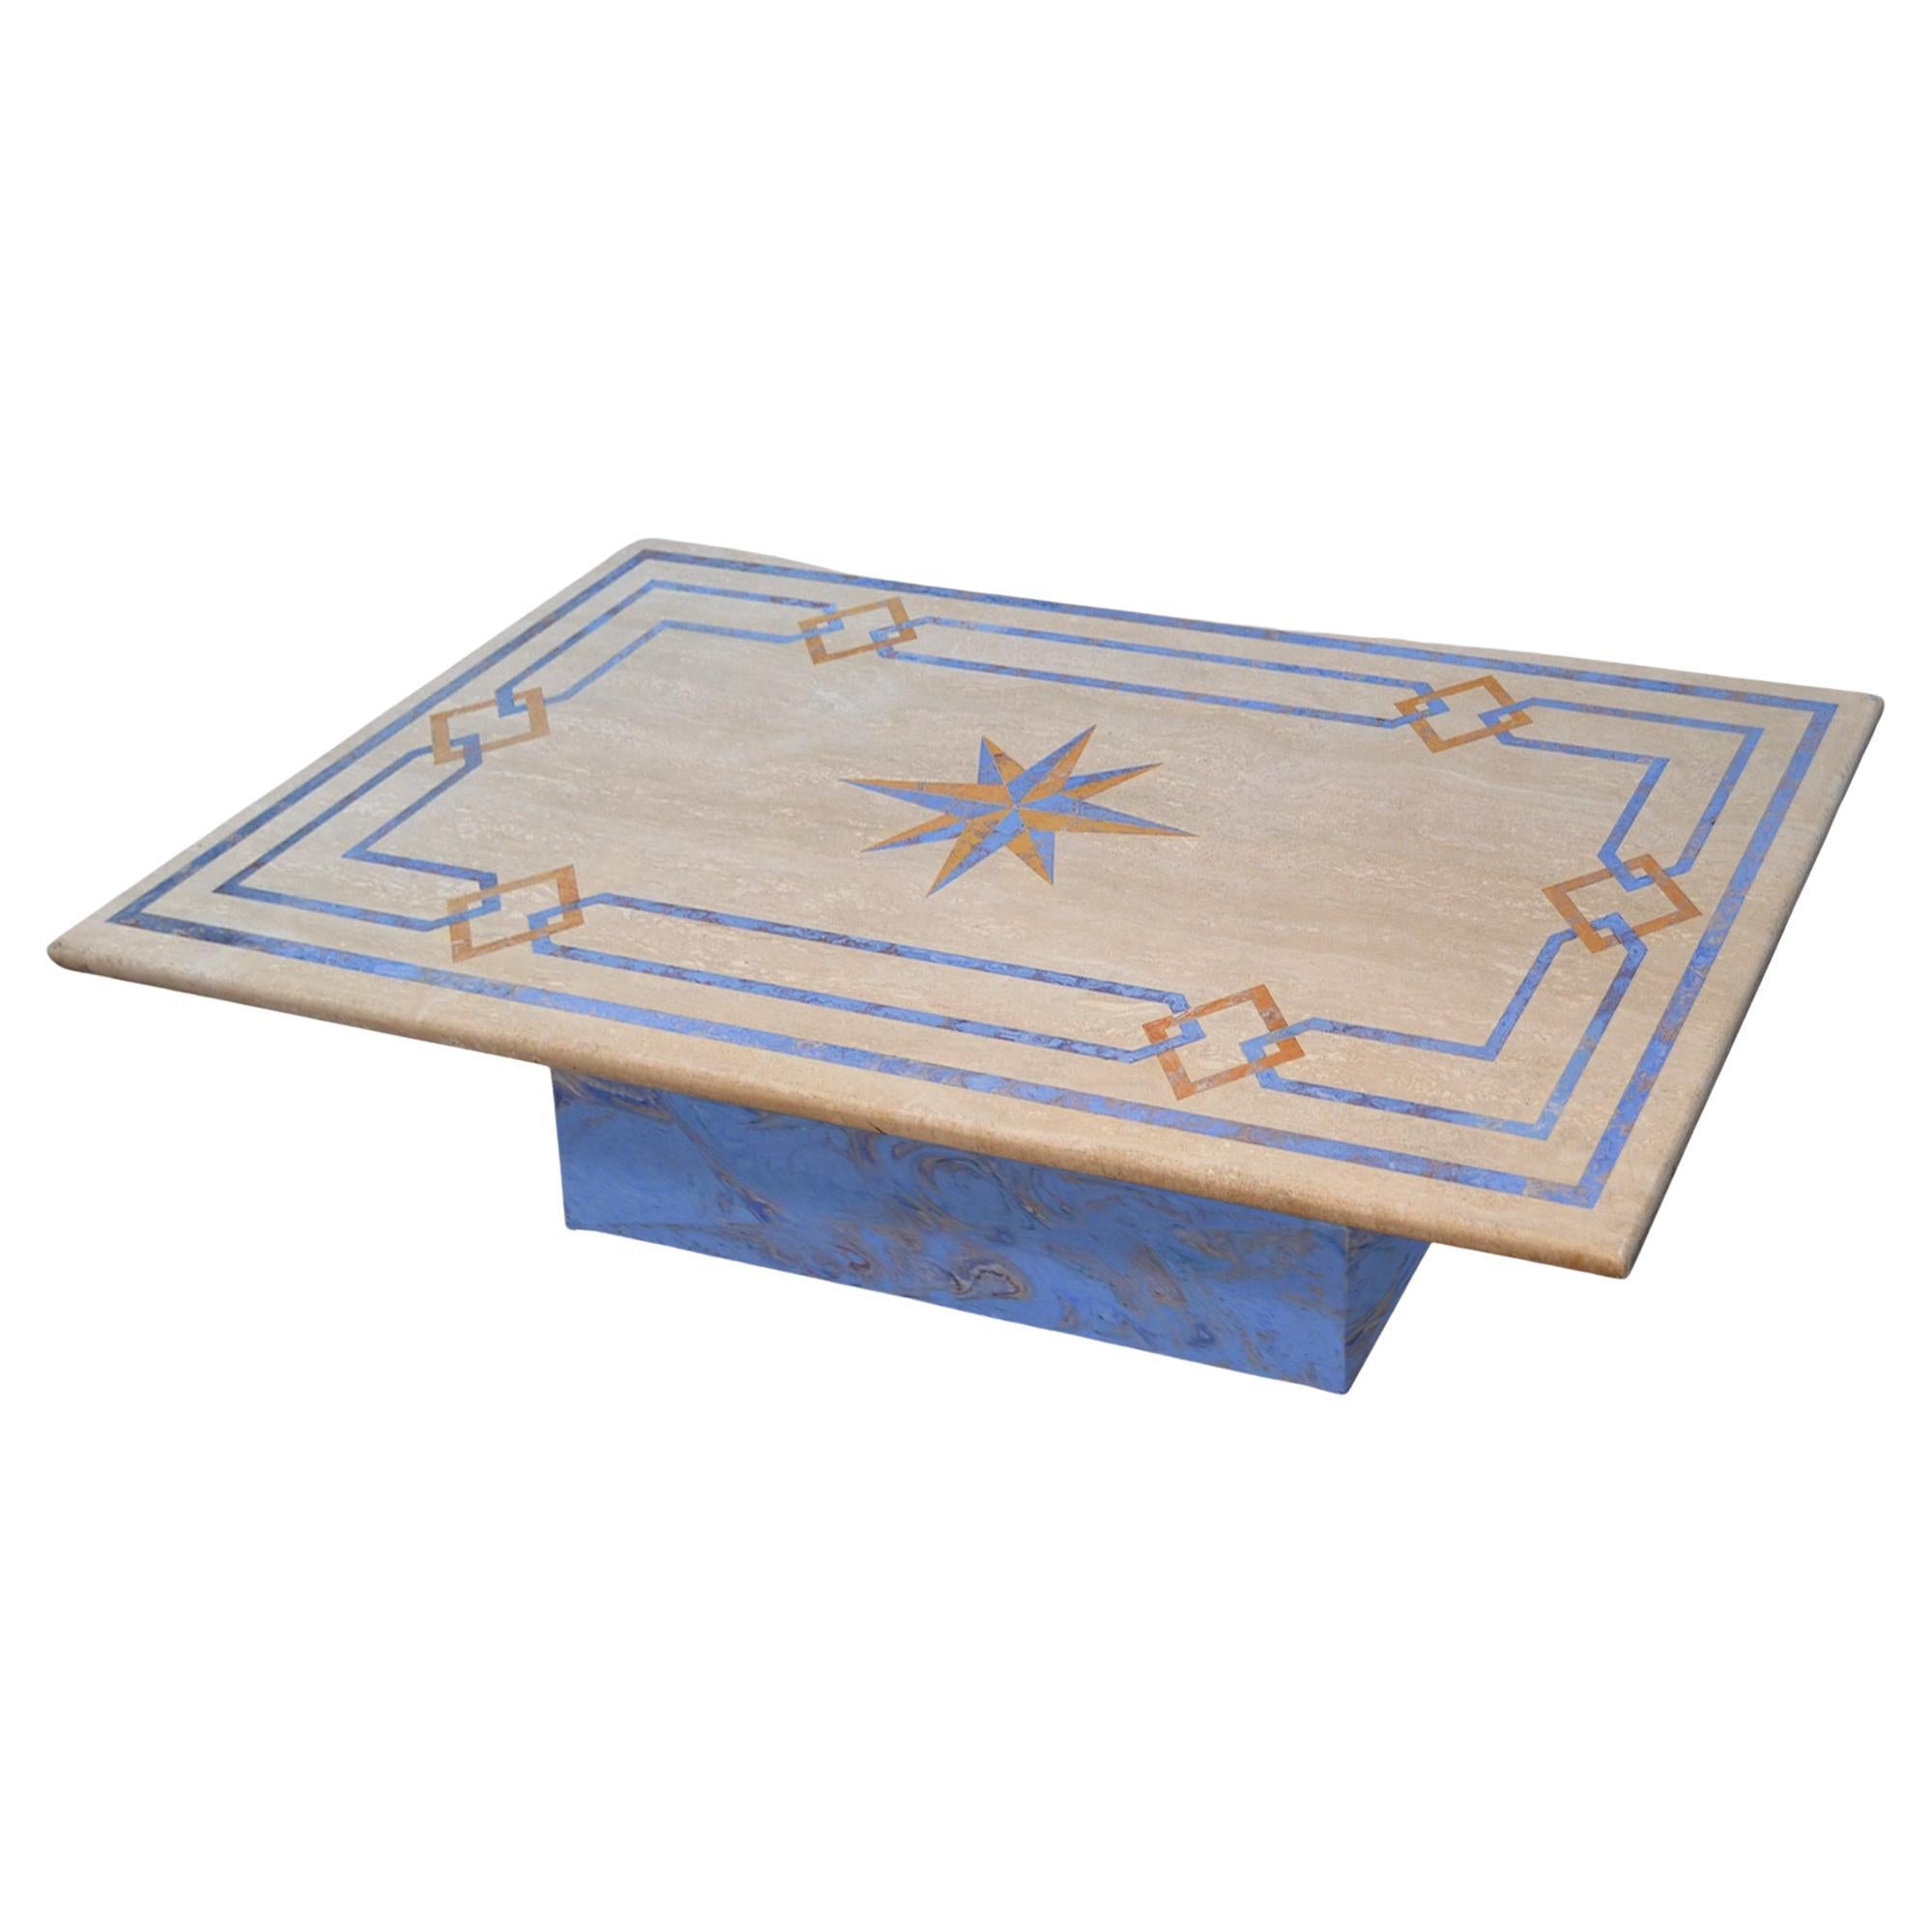 Coffee table travertine and blue scagliola decor handmade in Italy by Cupioli For Sale